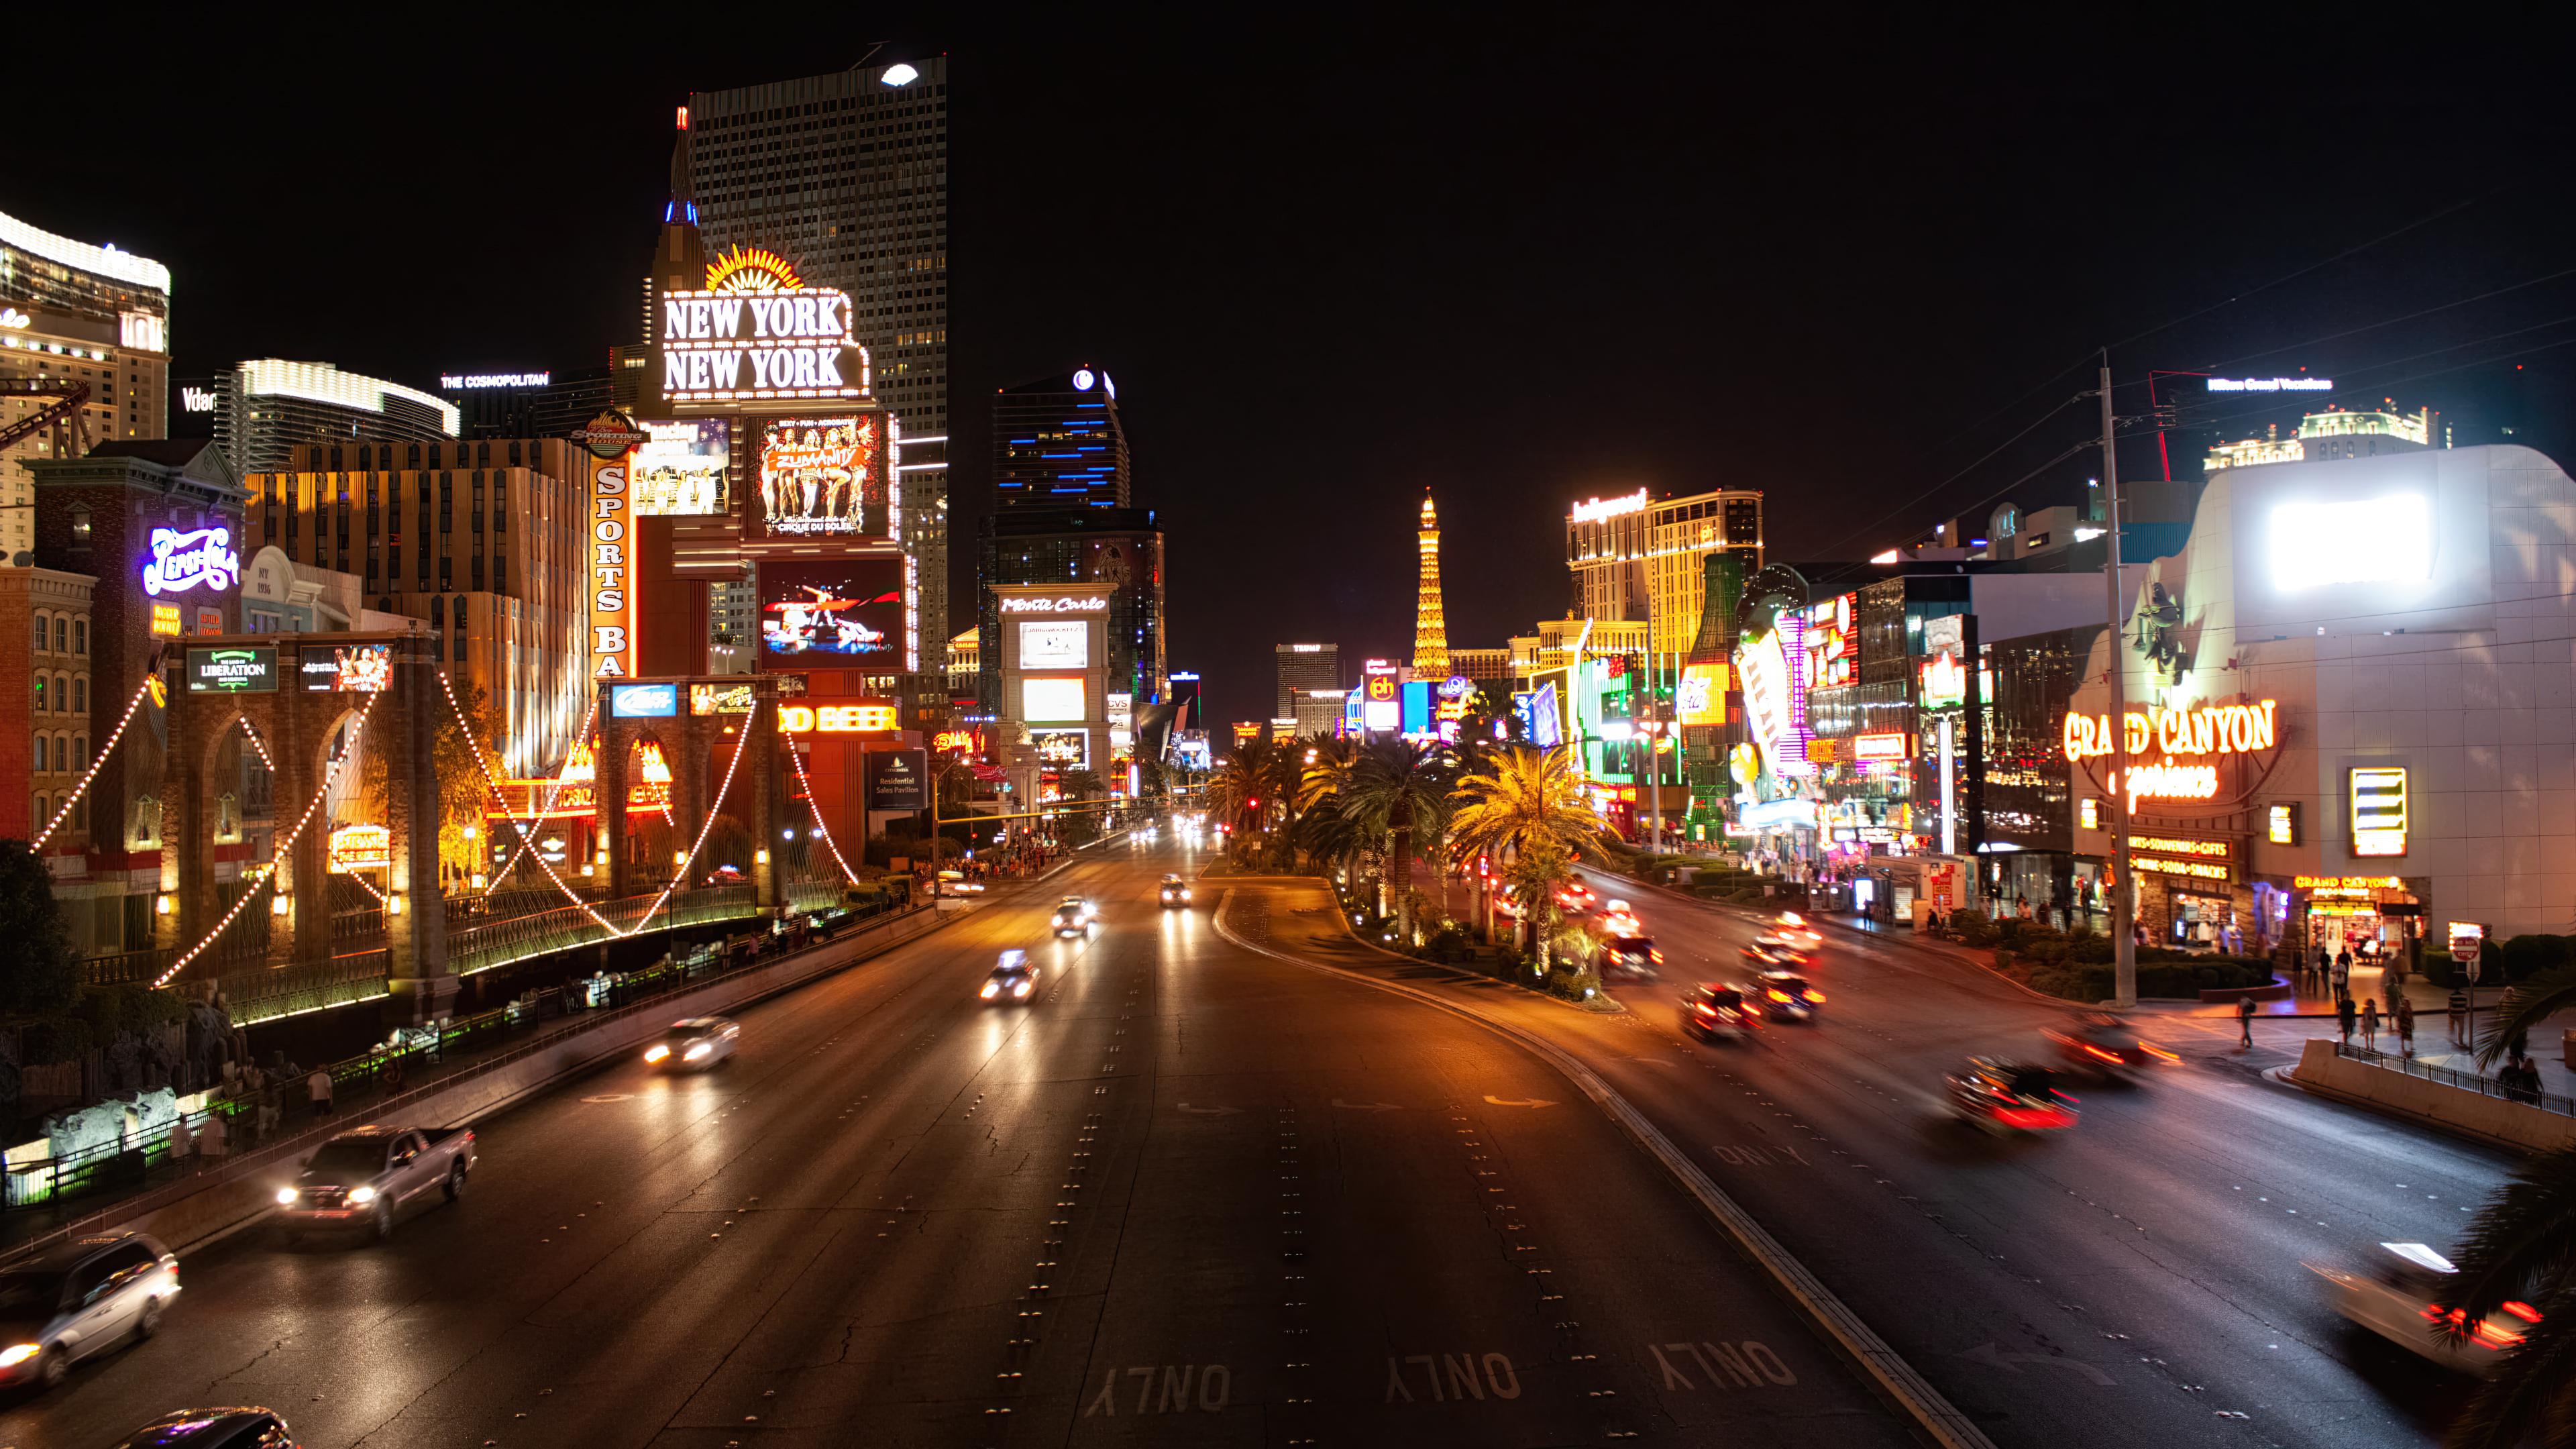 A city street at night with cars and neon lights. - Las Vegas